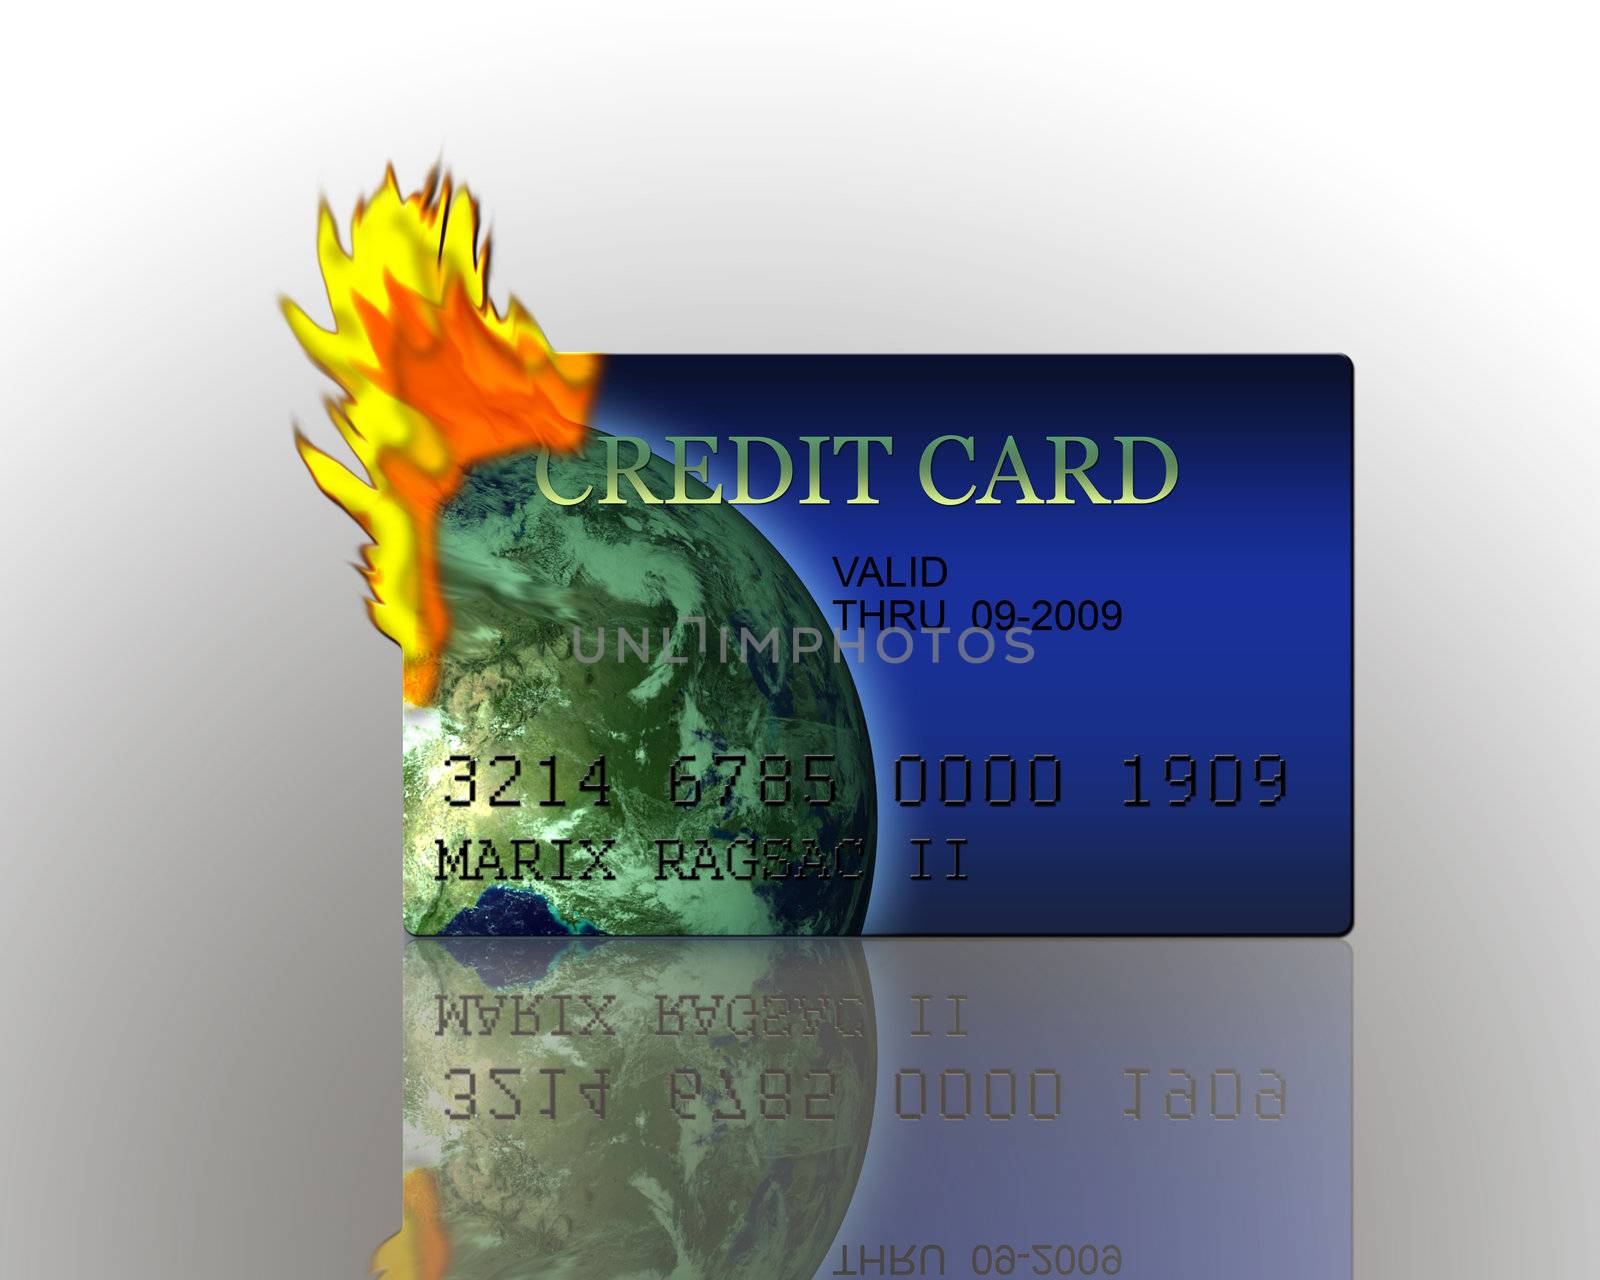 Render of 3D Credit Card burning high resolution - concept of financial difficulty